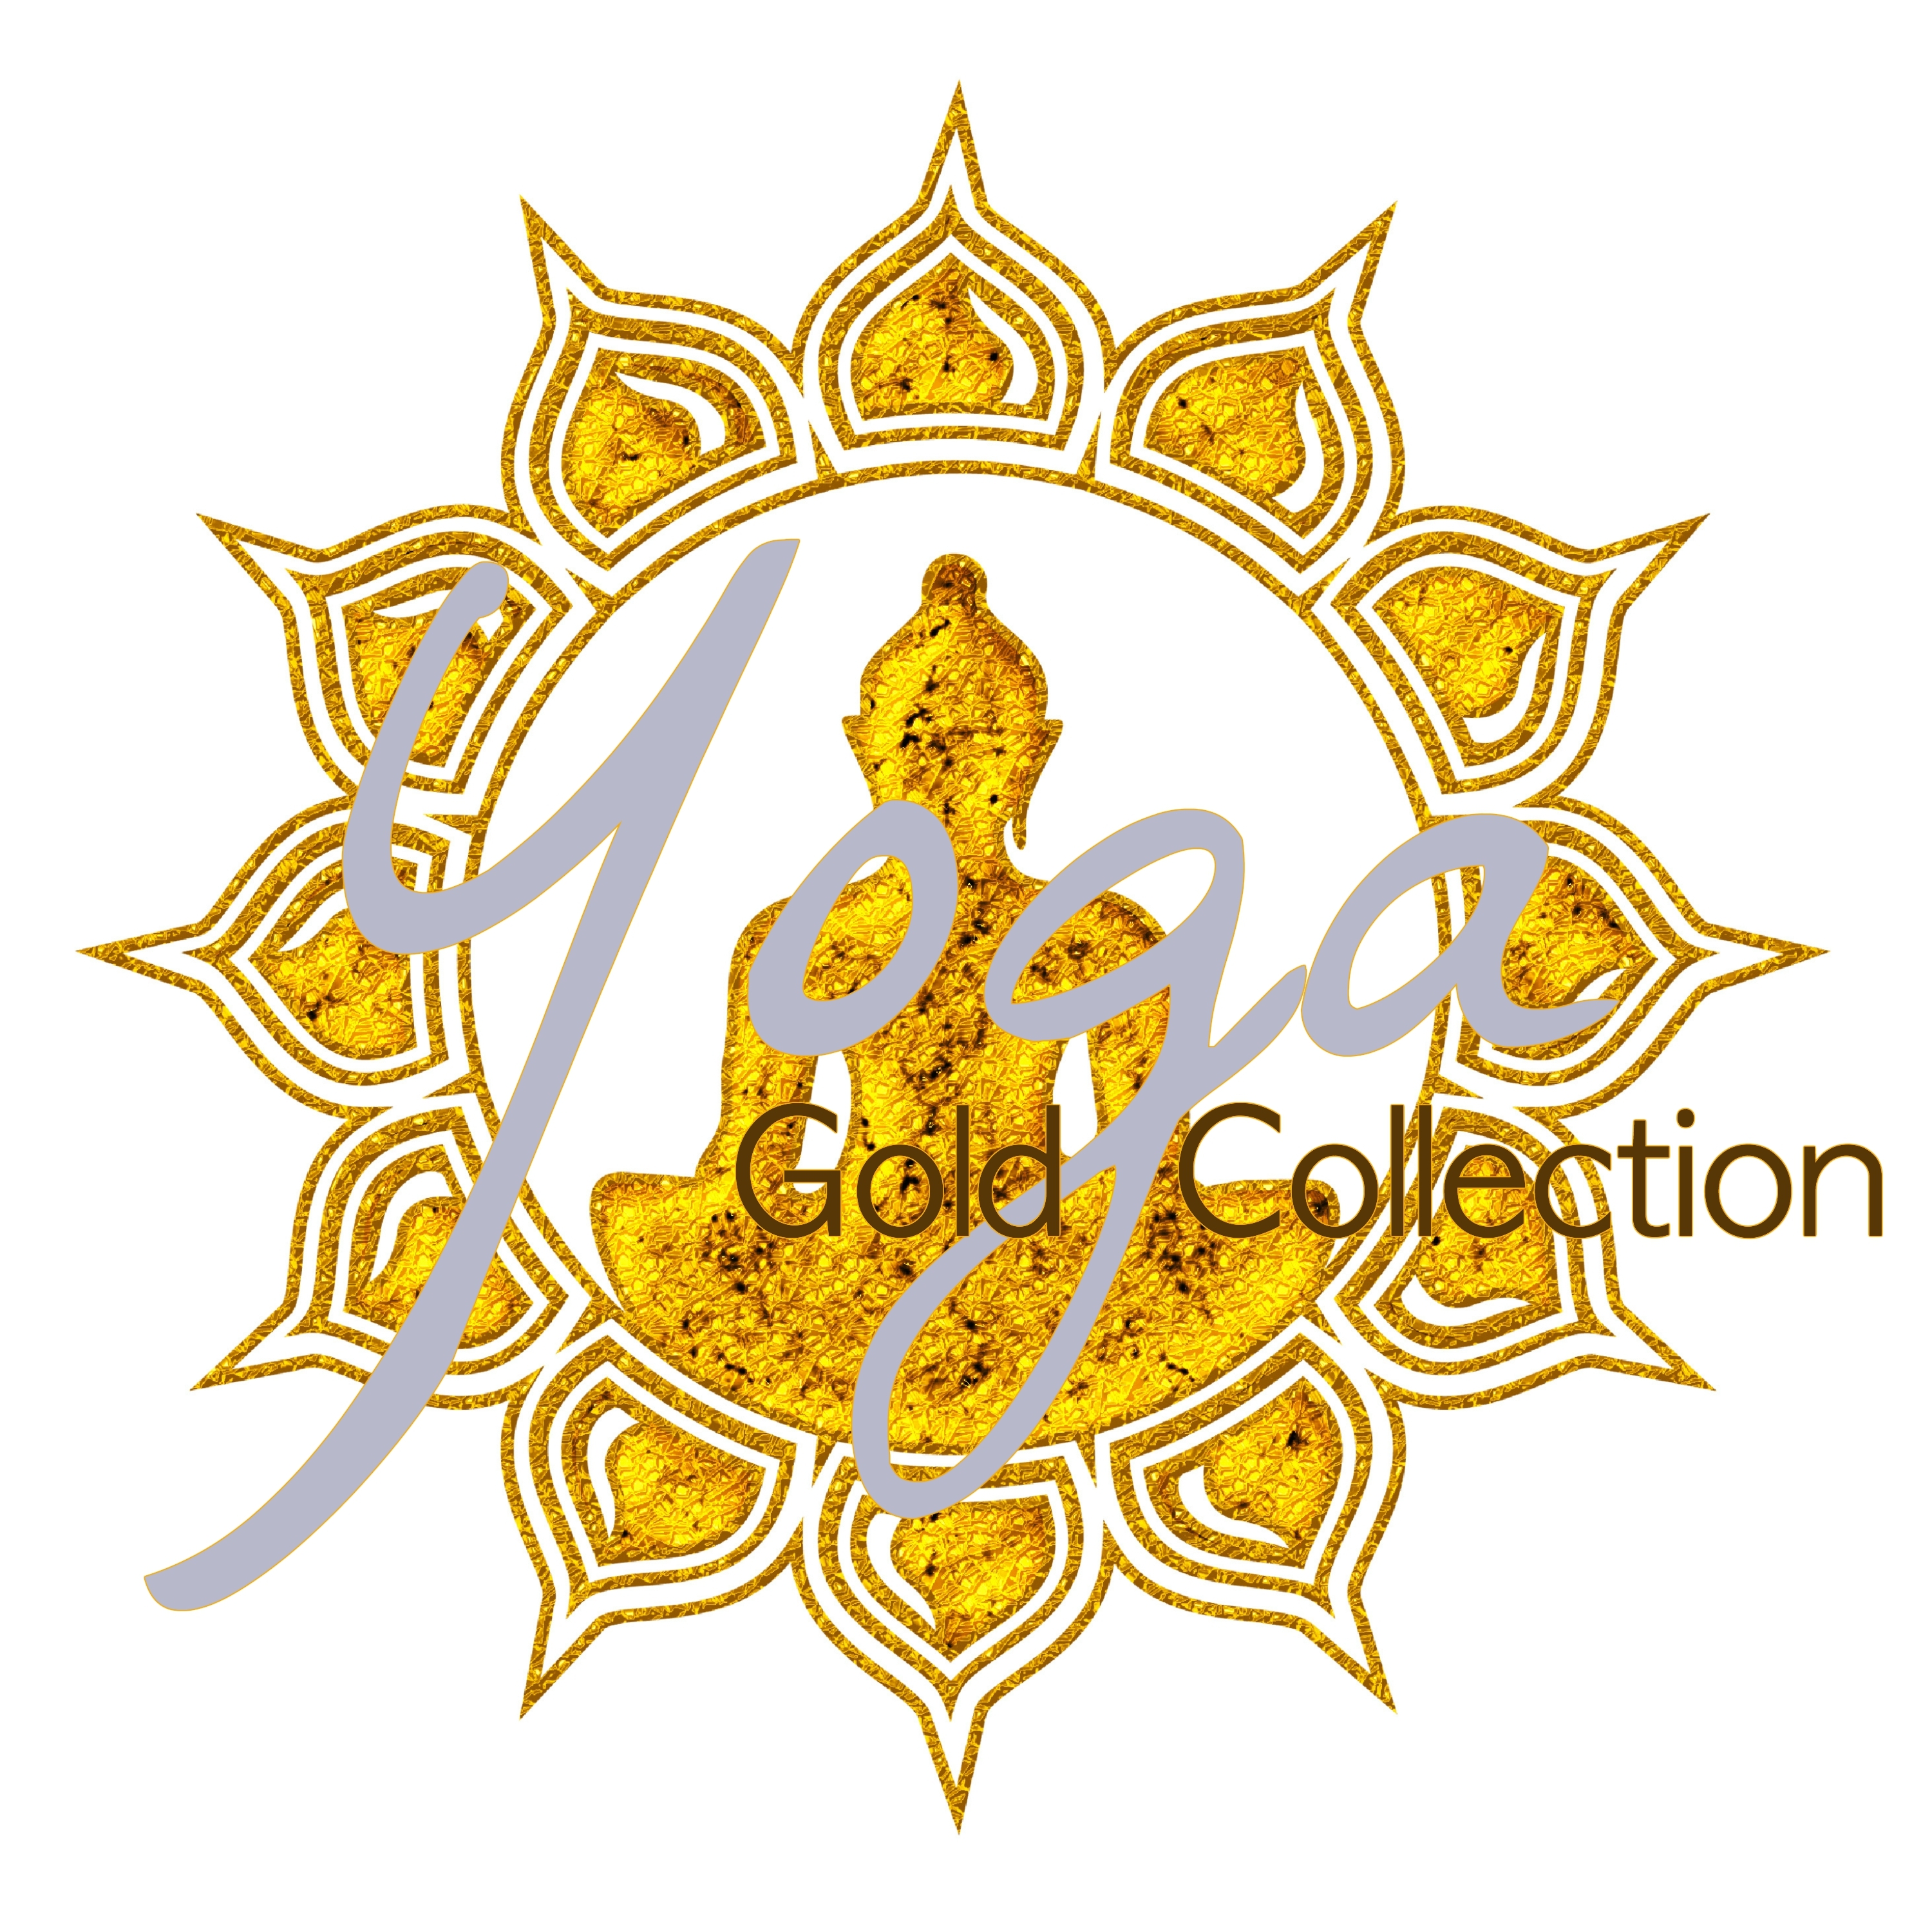 Yoga Gold Collection  Top 30 Yoga Songs for Yoga Classes